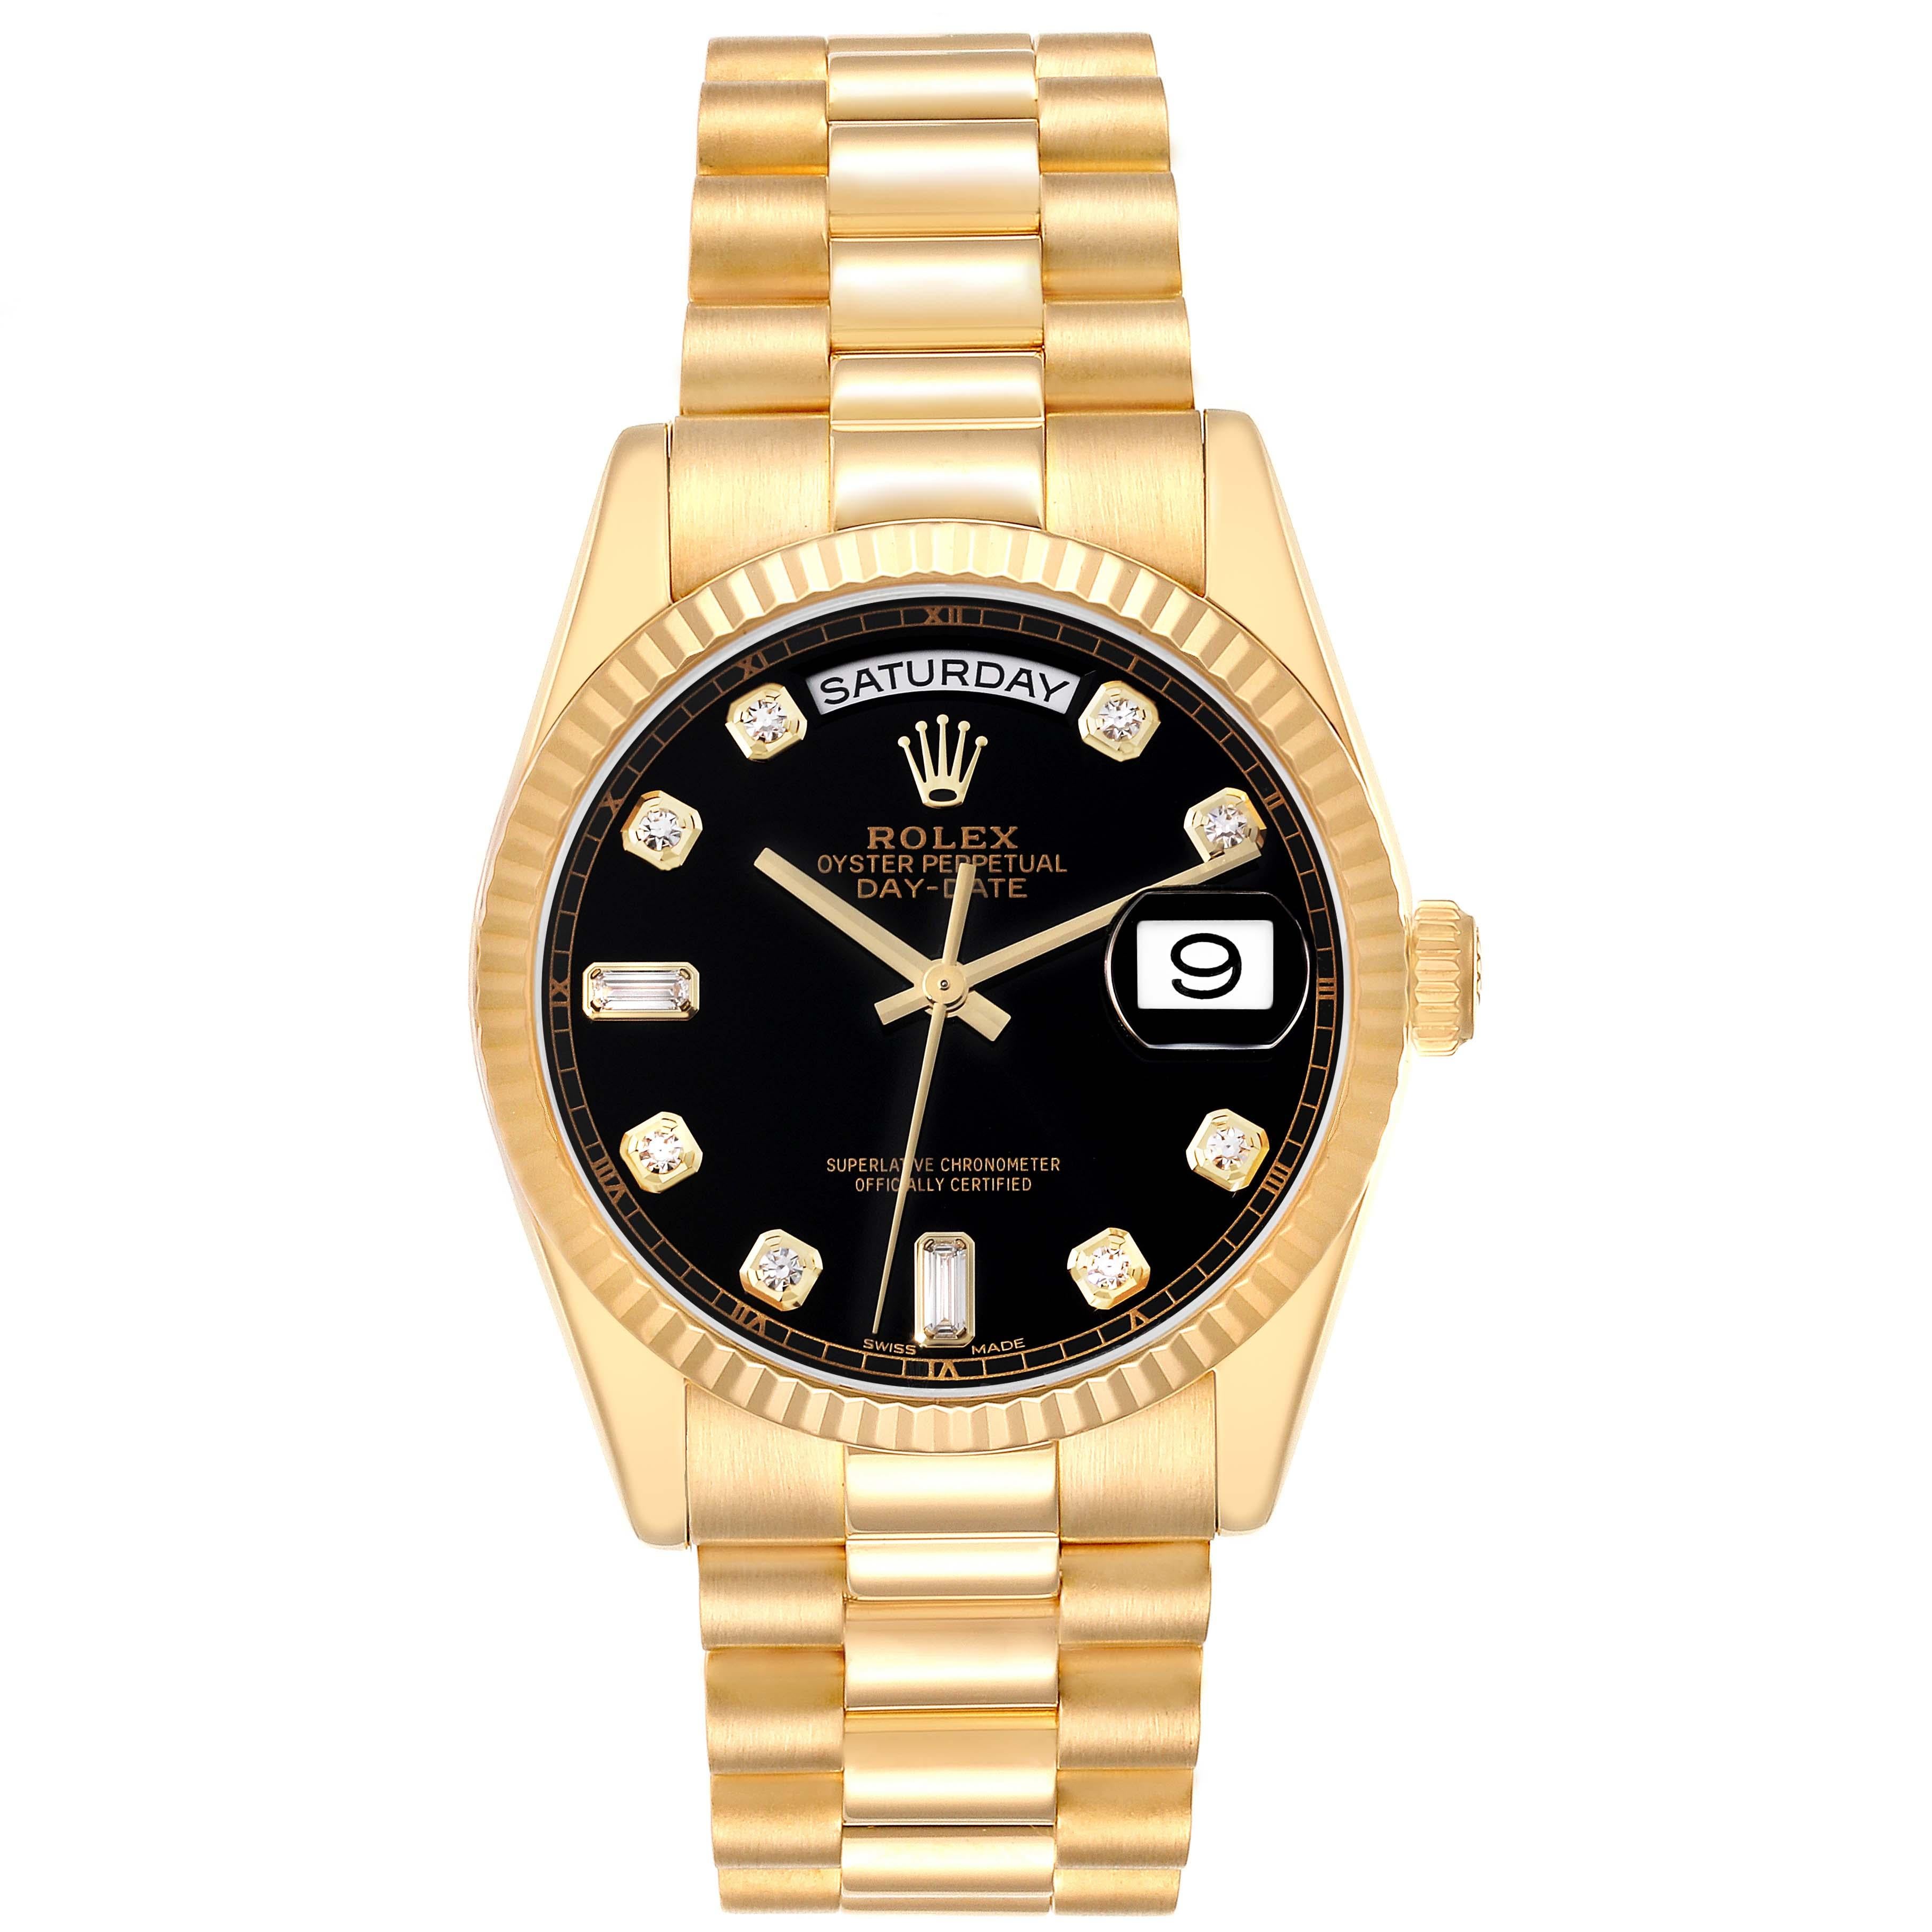 Rolex President Day Date Yellow Gold Black Diamond Dial Mens Watch 118238. Officially certified chronometer automatic self-winding movement. 18k yellow gold oyster case 36.0 mm in diameter. Rolex logo on a crown. 18K yellow gold fluted bezel.